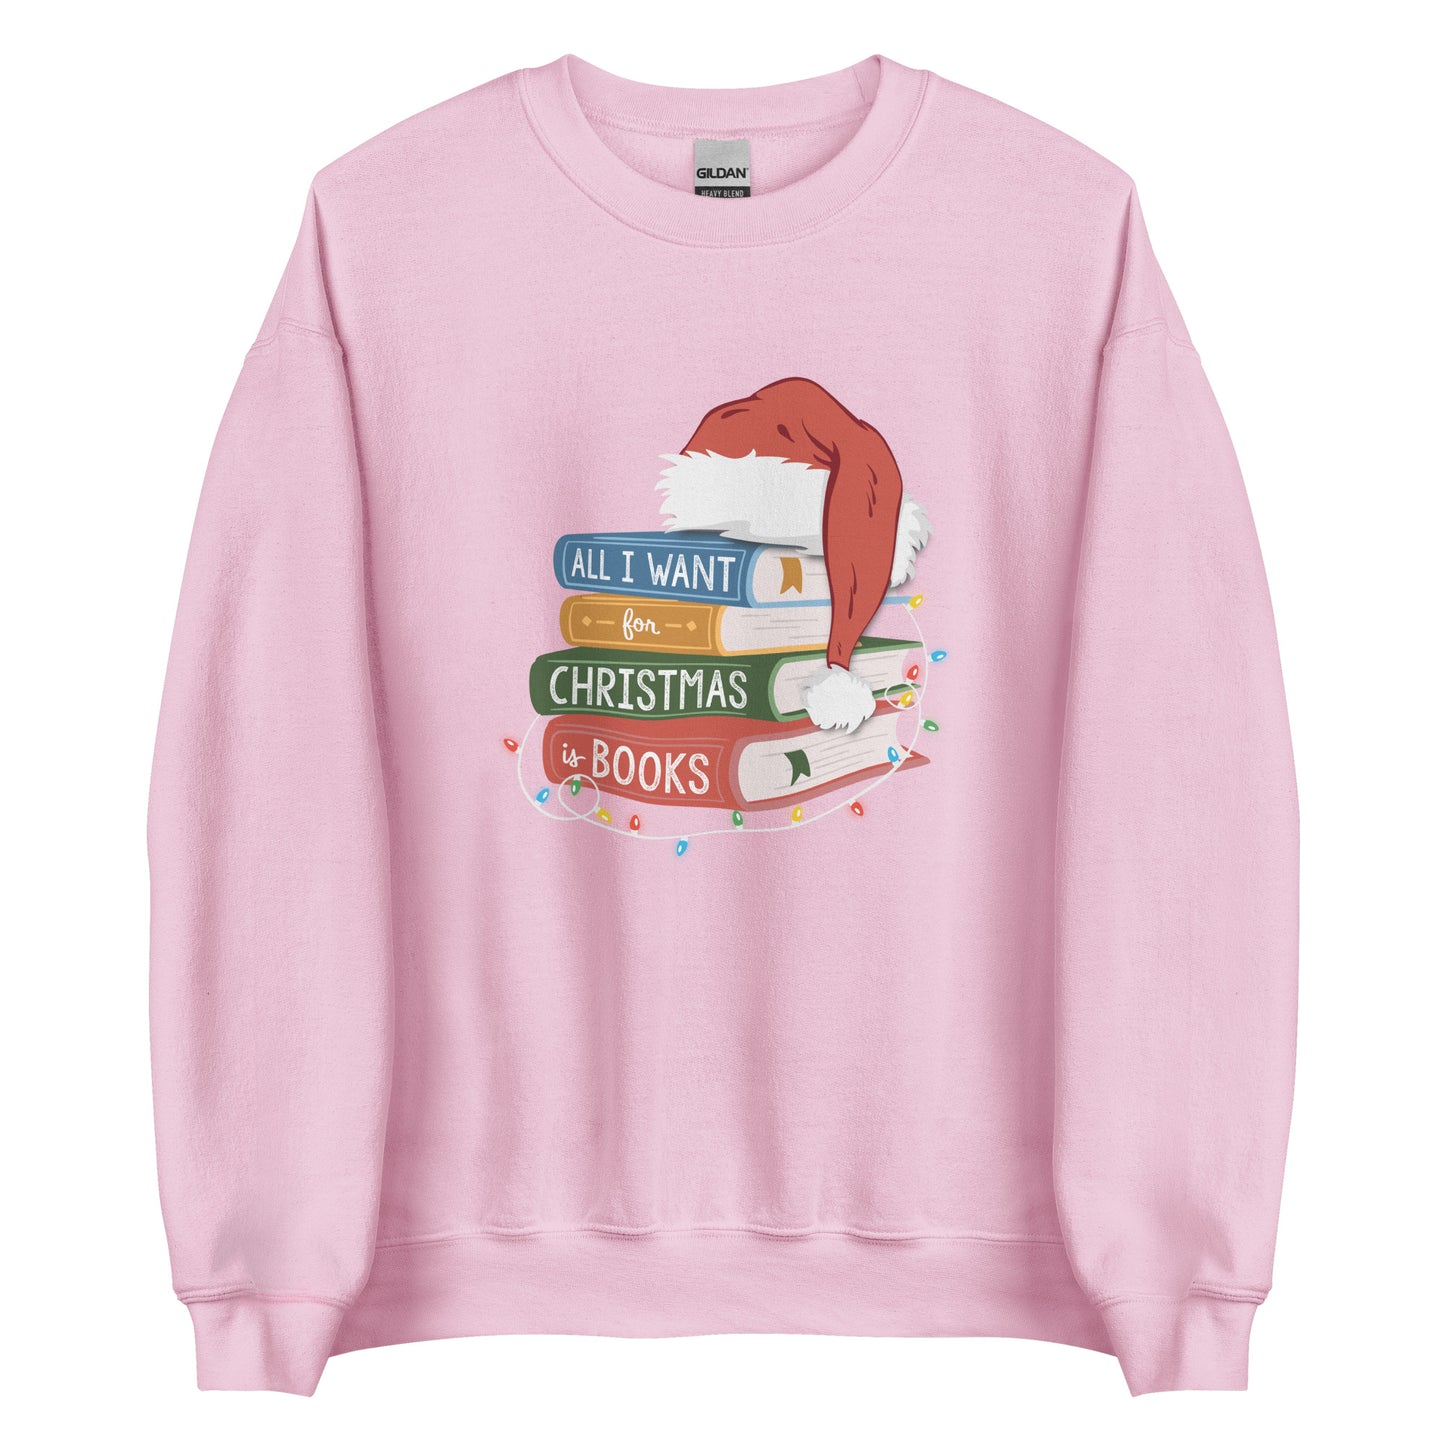 all i want for christmas is books (book stack) sweatshirt